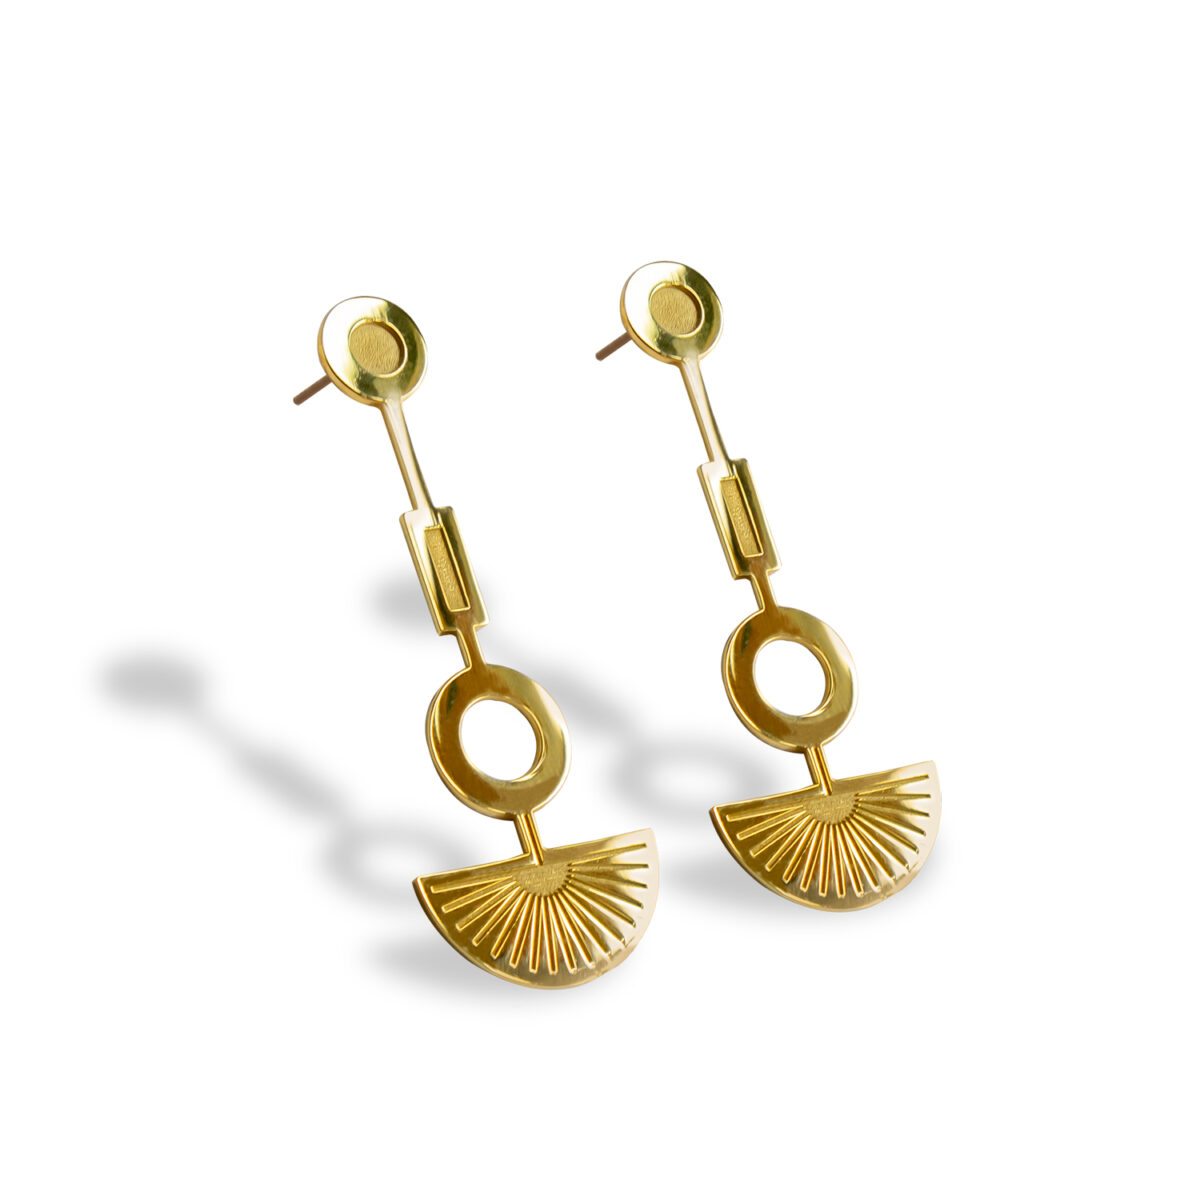 Elegant gold dangle earrings with round and fan-shaped elements on a white background.